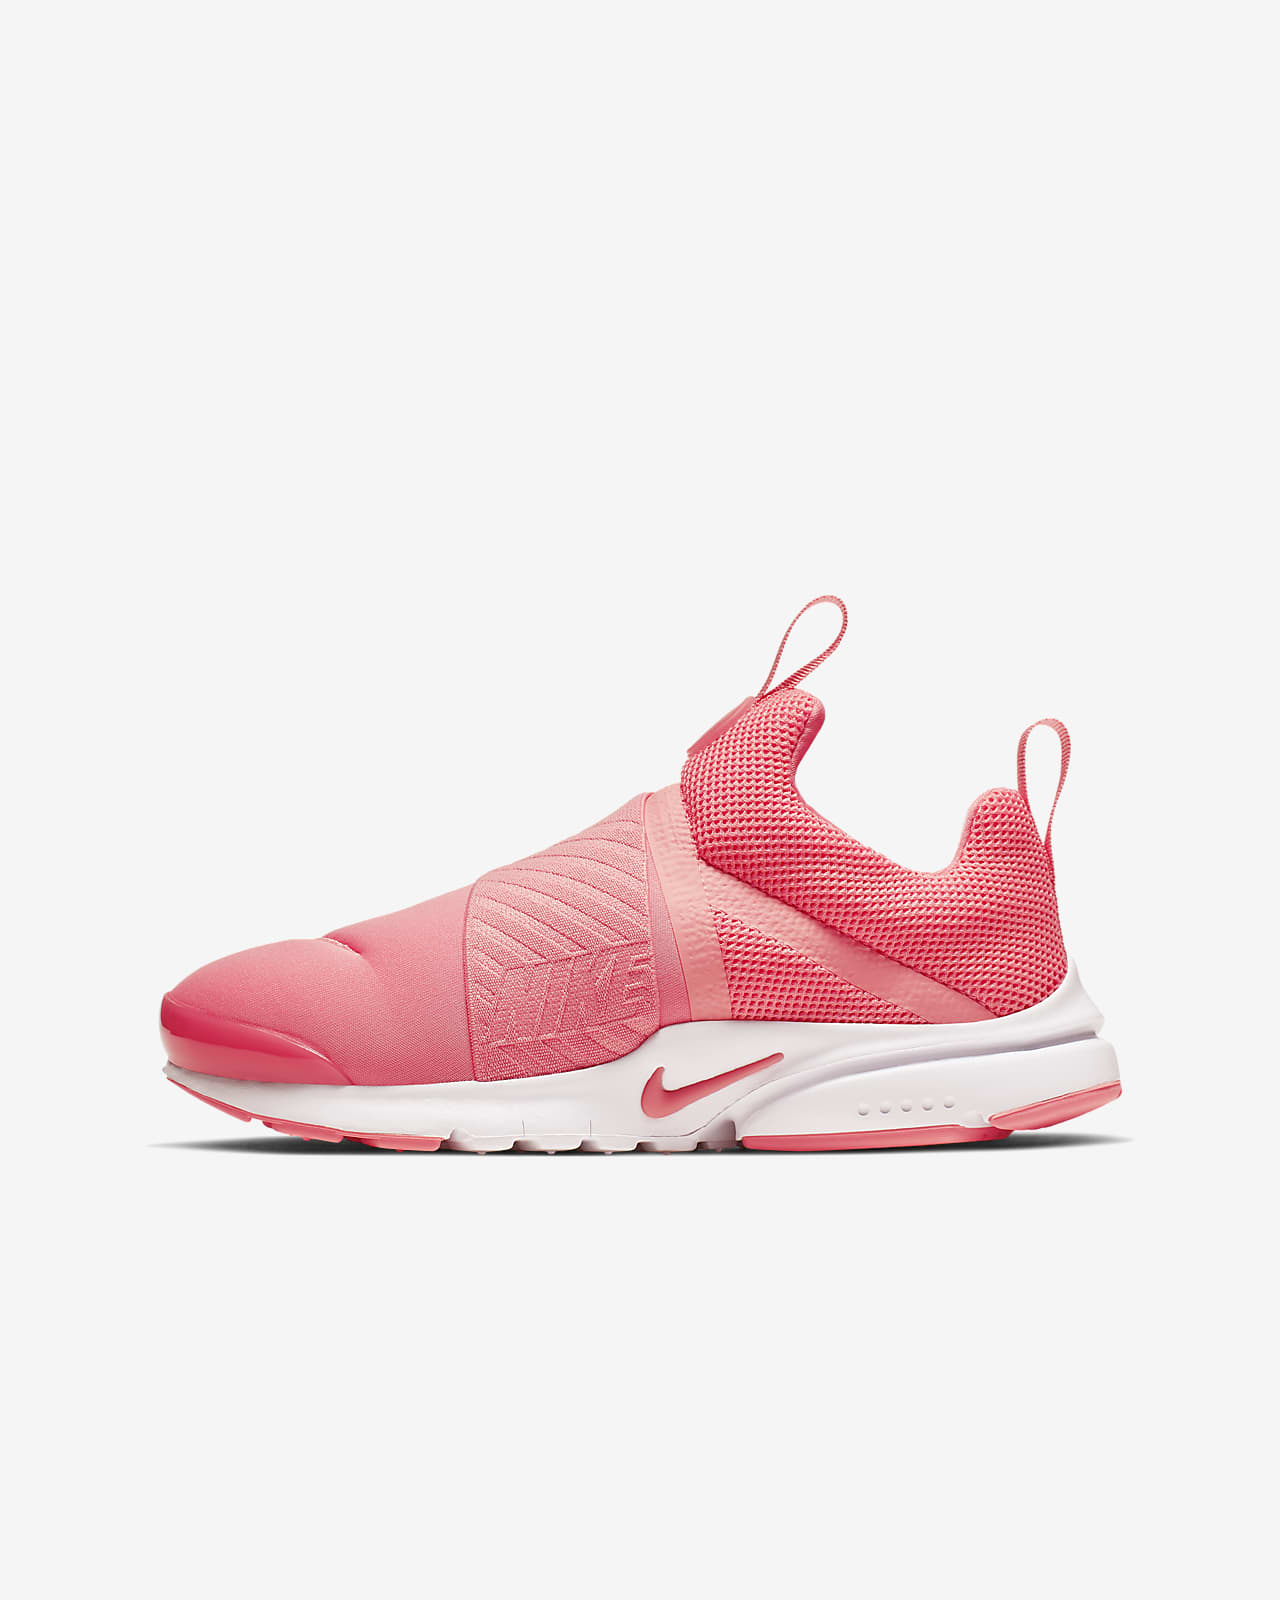 are nike presto running shoes